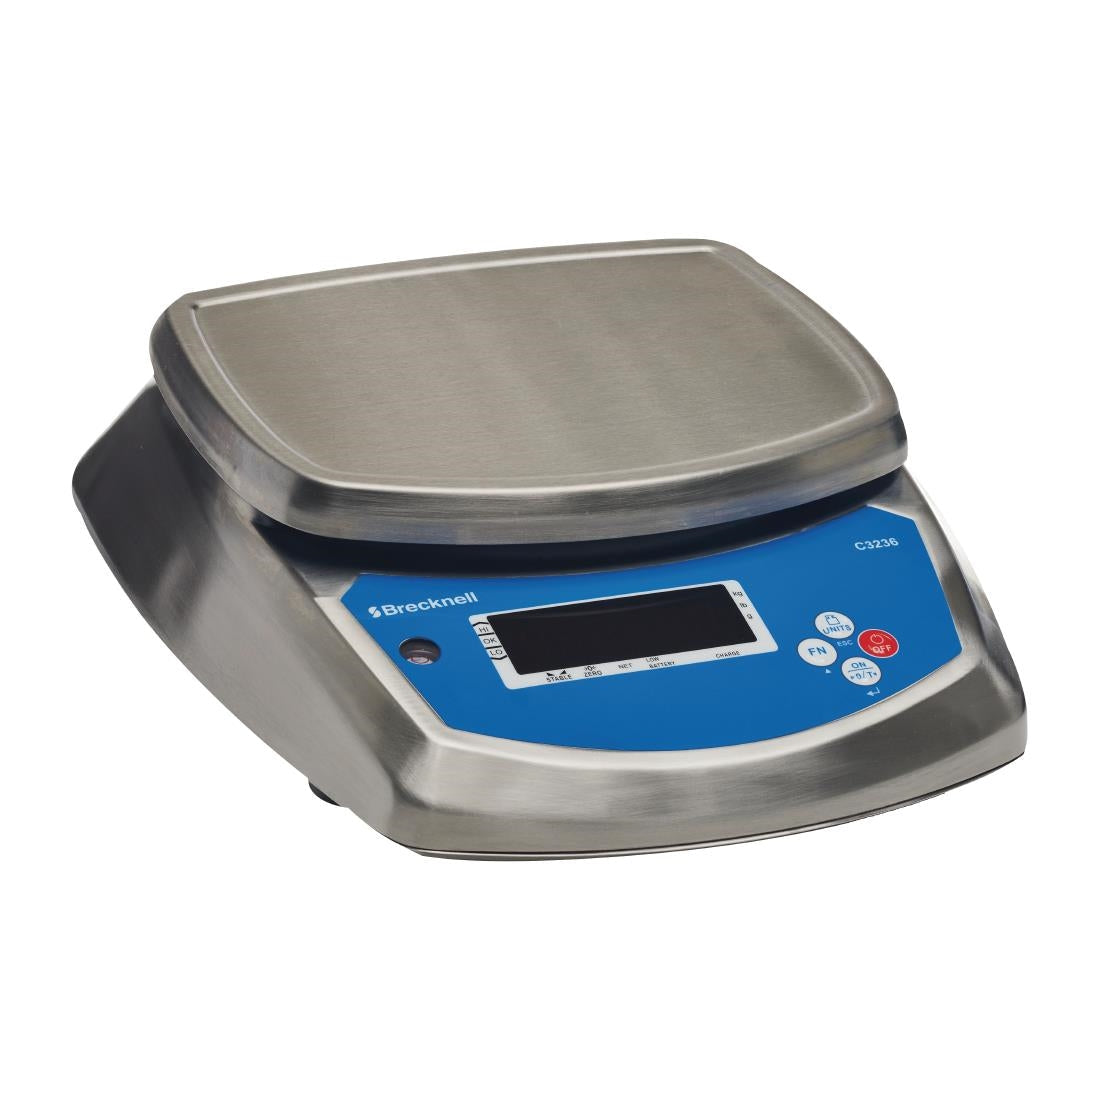 CH078 Brecknell Check Weigher Scales 7 kg JD Catering Equipment Solutions Ltd